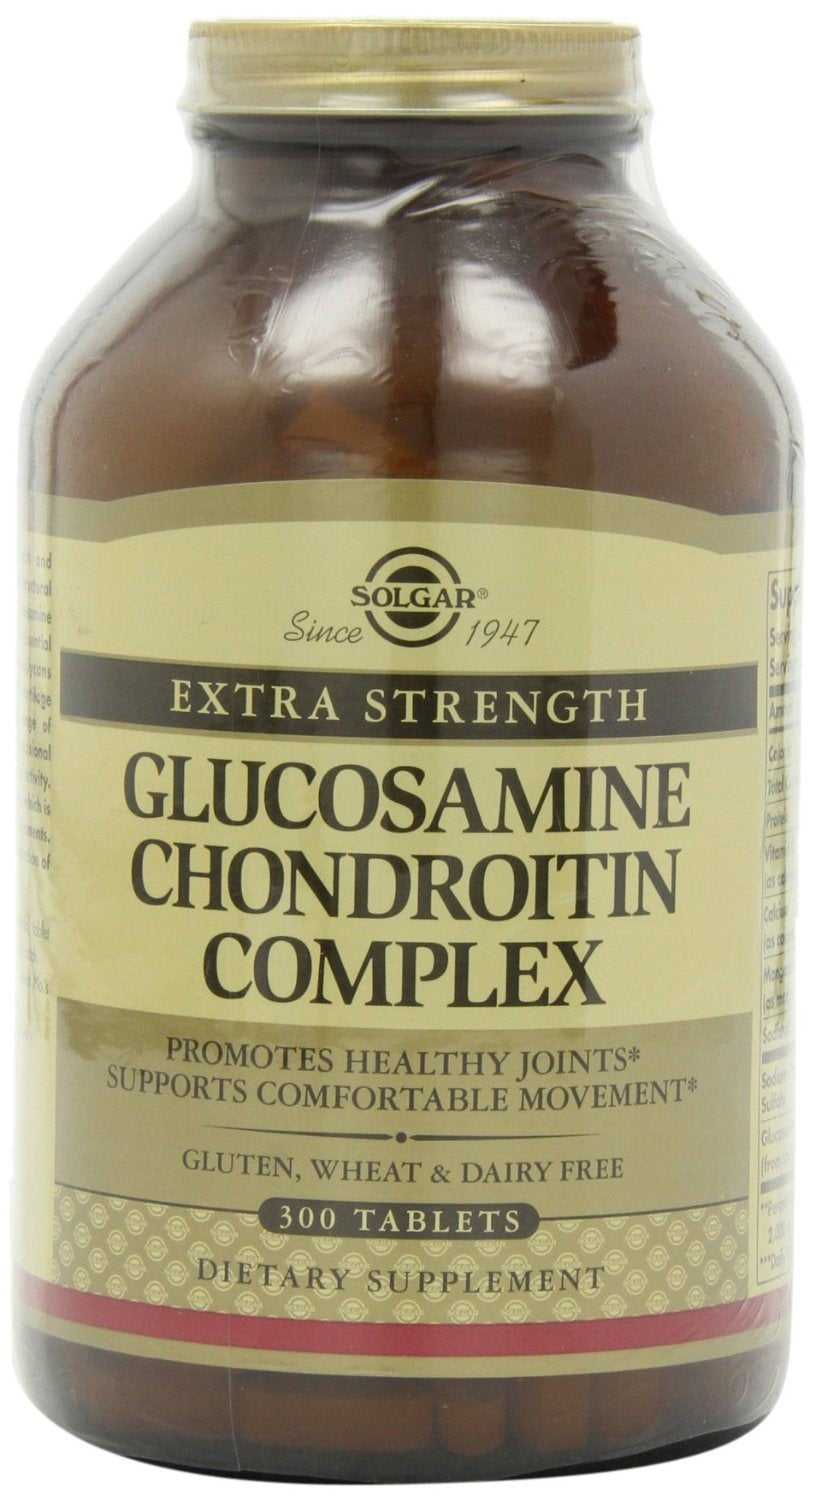 Solgar Extra Strength Glucosamine Chondroitin Complex Tablets, 300 Ct